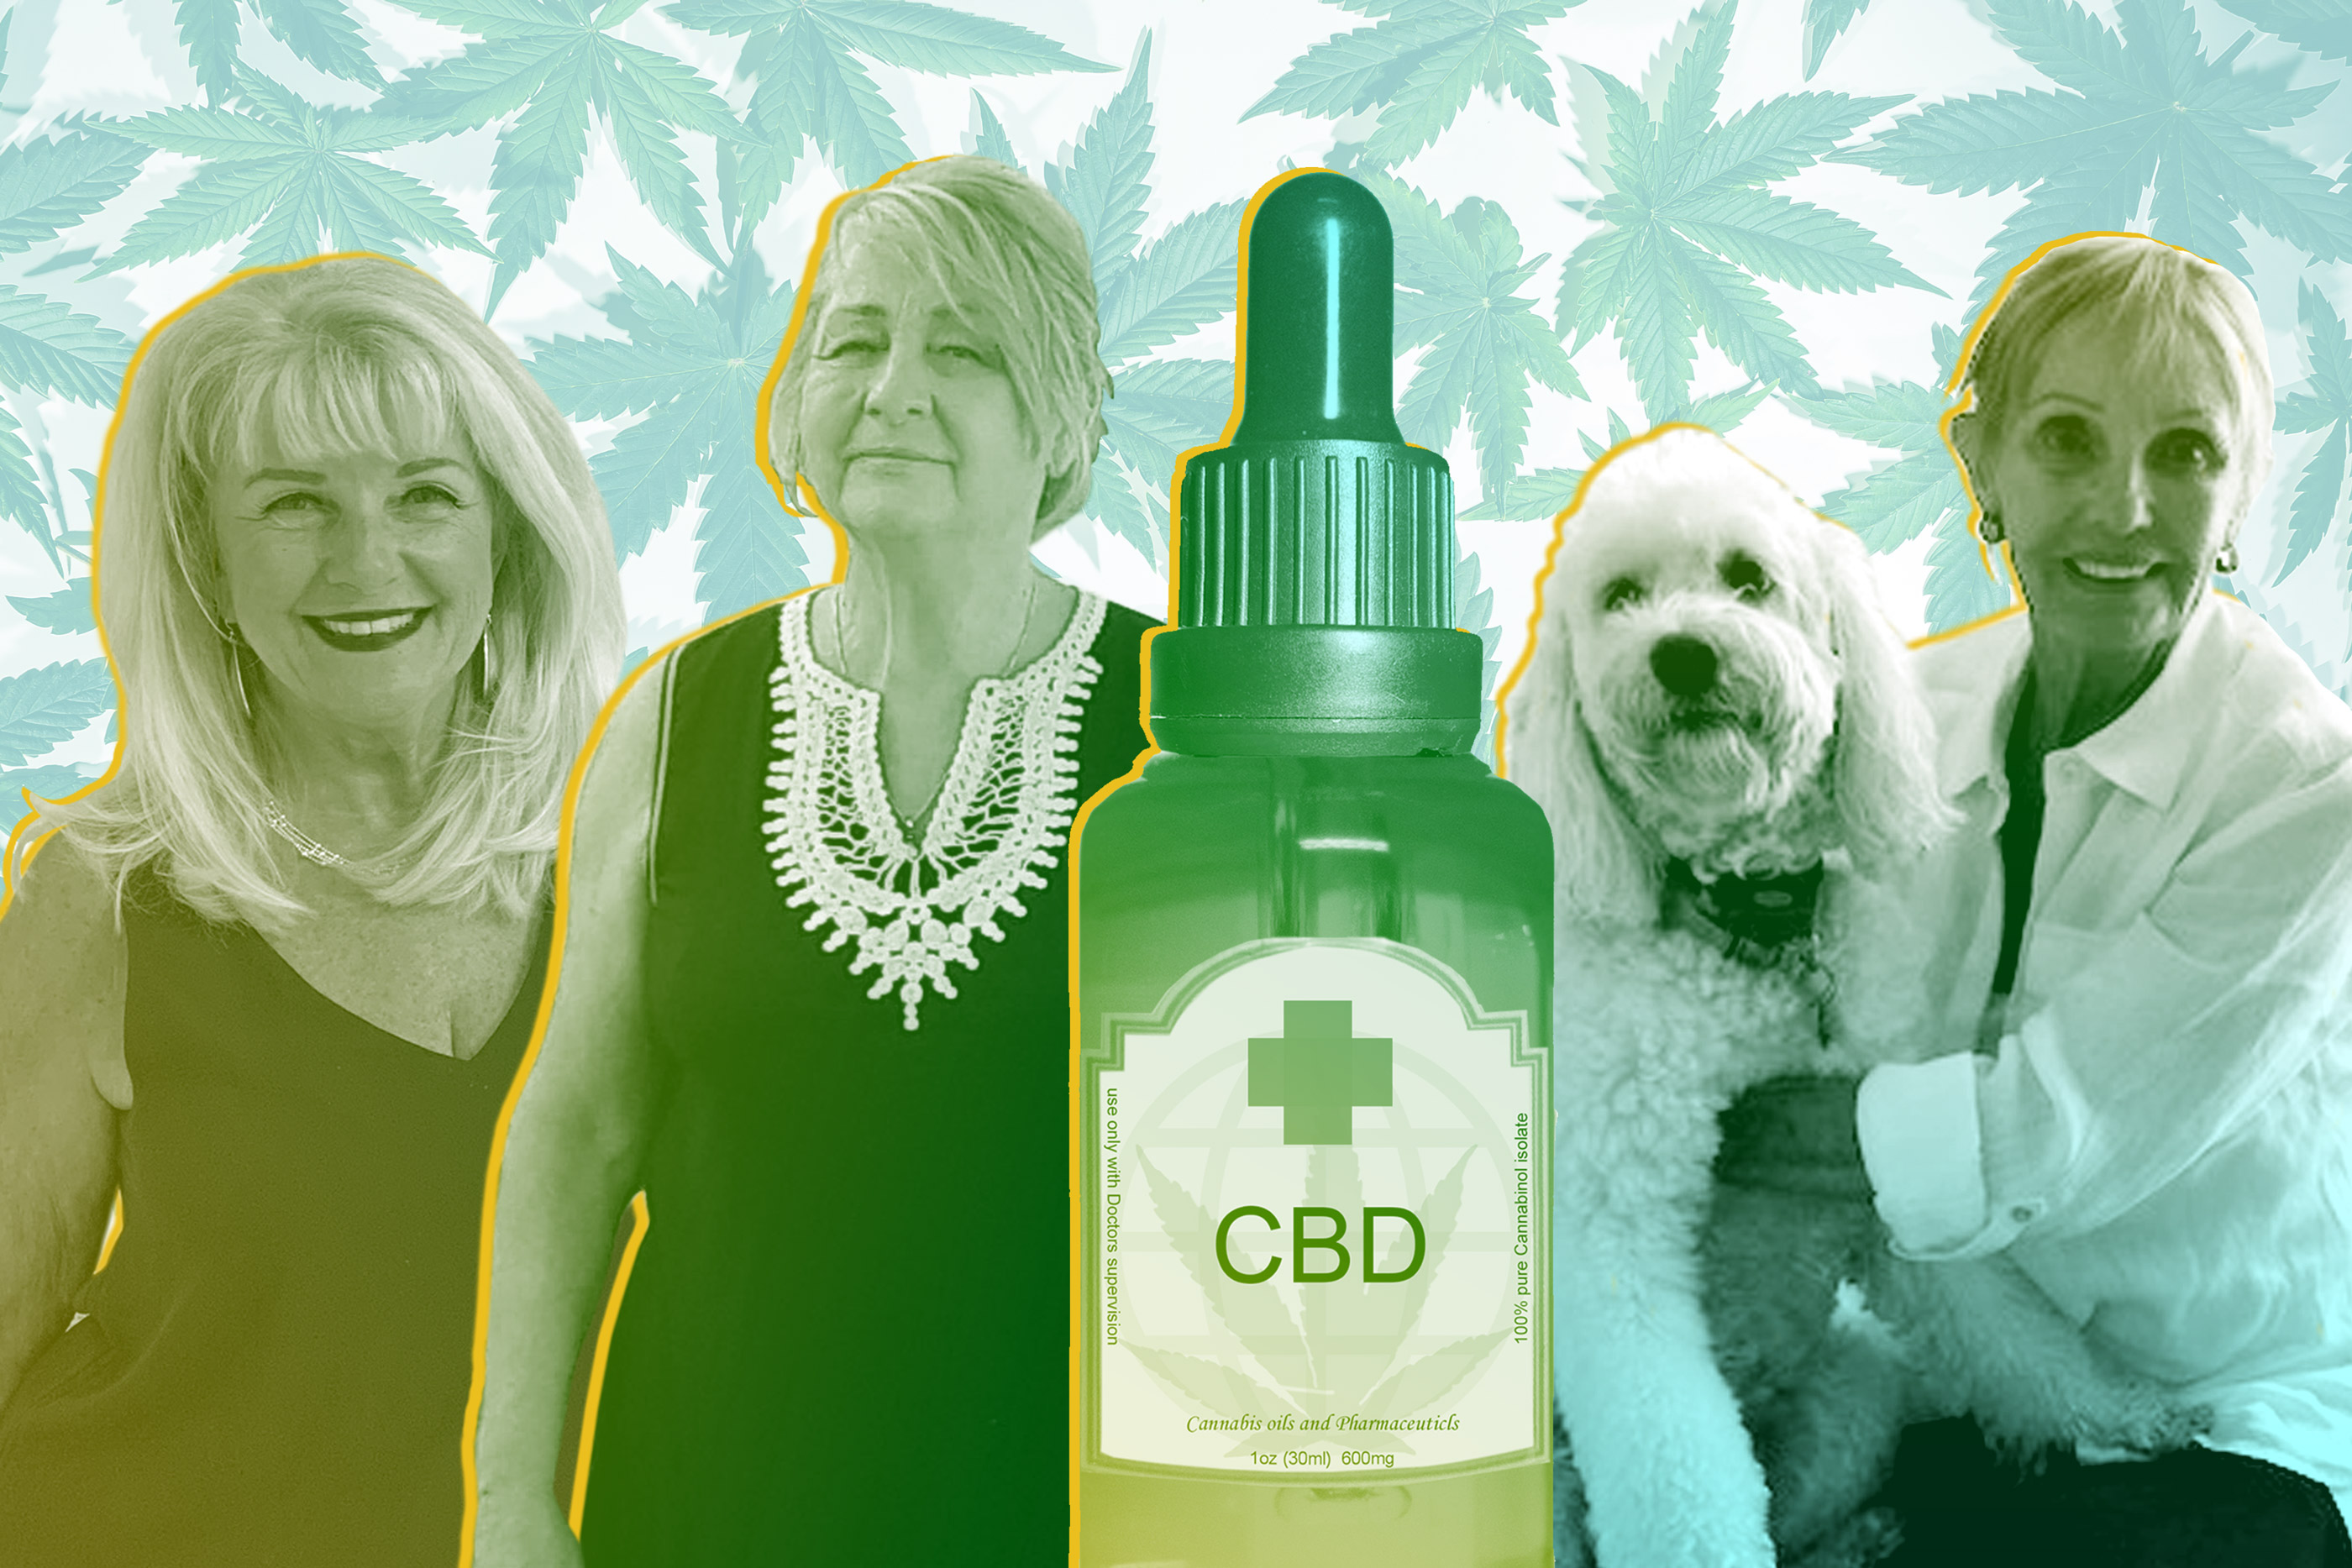 Retirees Are Jumping Into the CBD Boom—and Loving It. Here's What to Know Before You Try, According to Experts